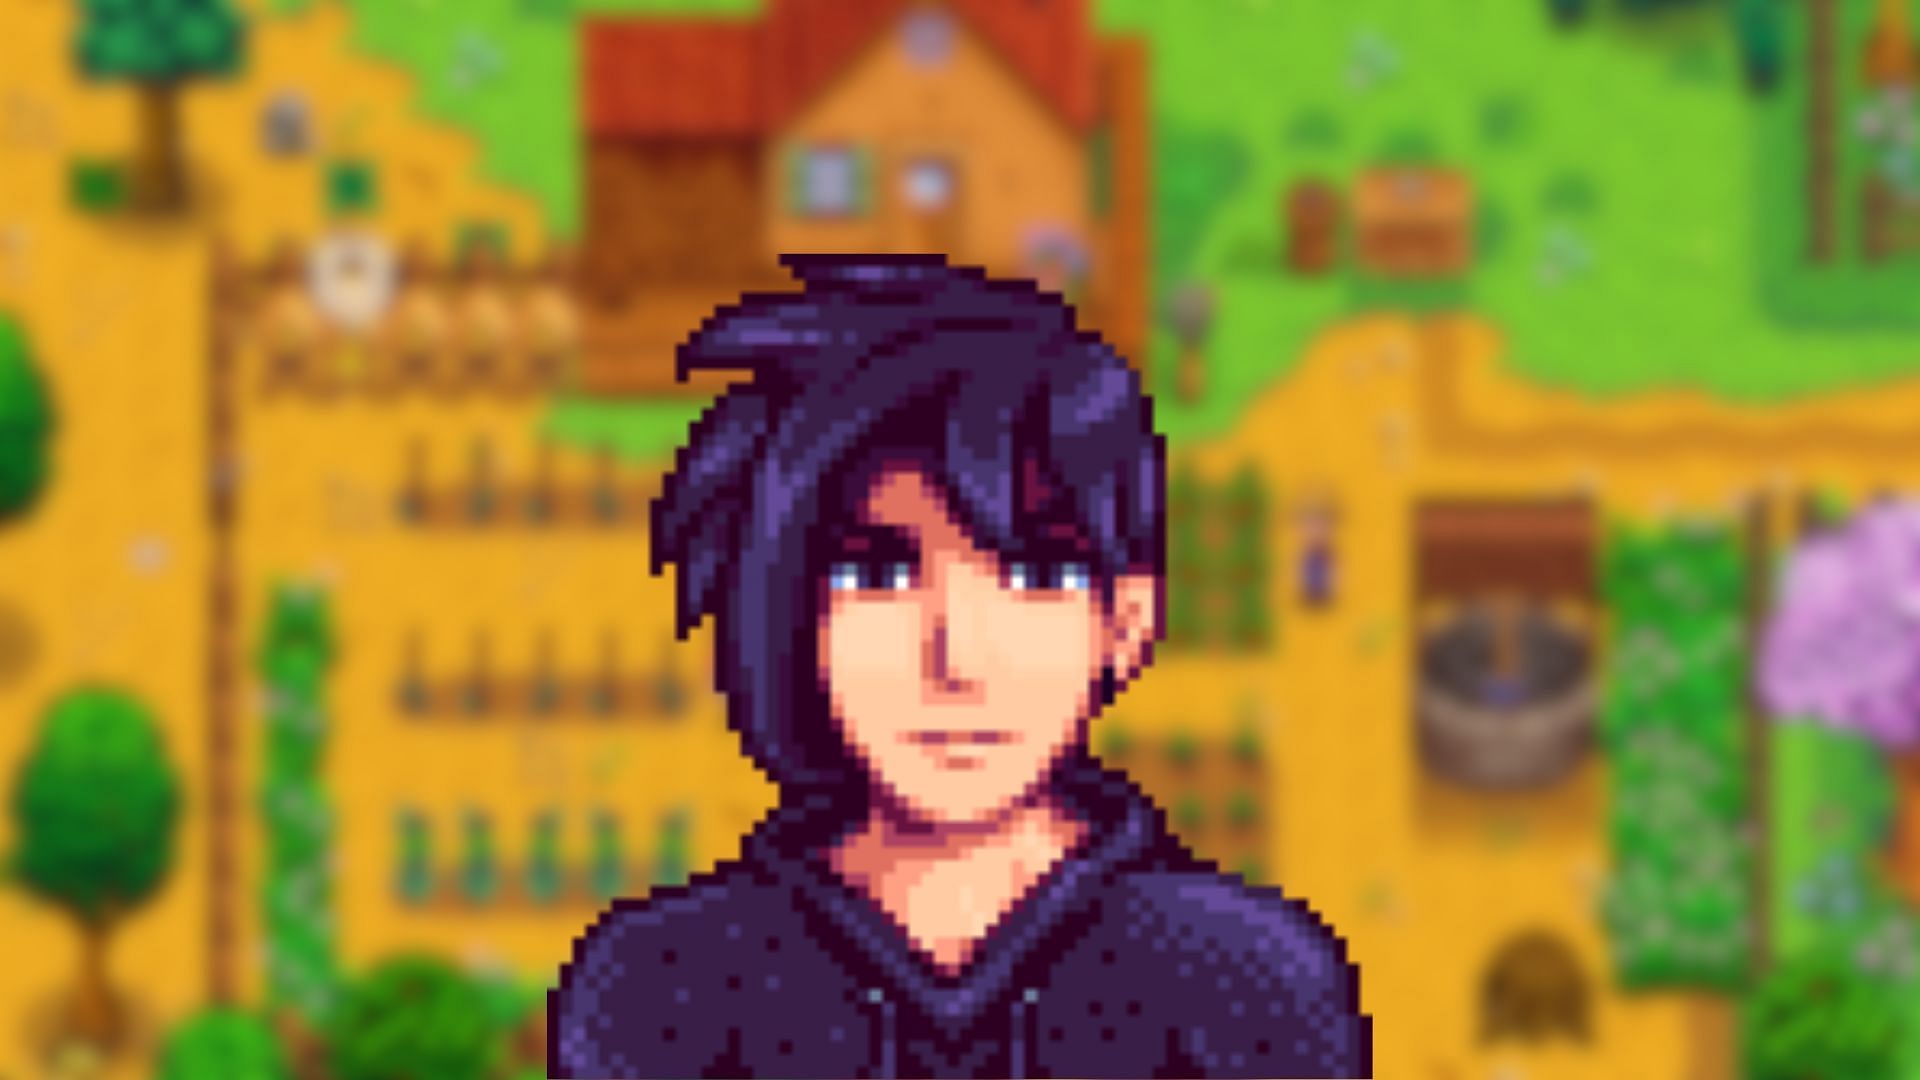 Sebastian in Stardew Valley is one of the marriage candidates (Image via ConcernedApe)